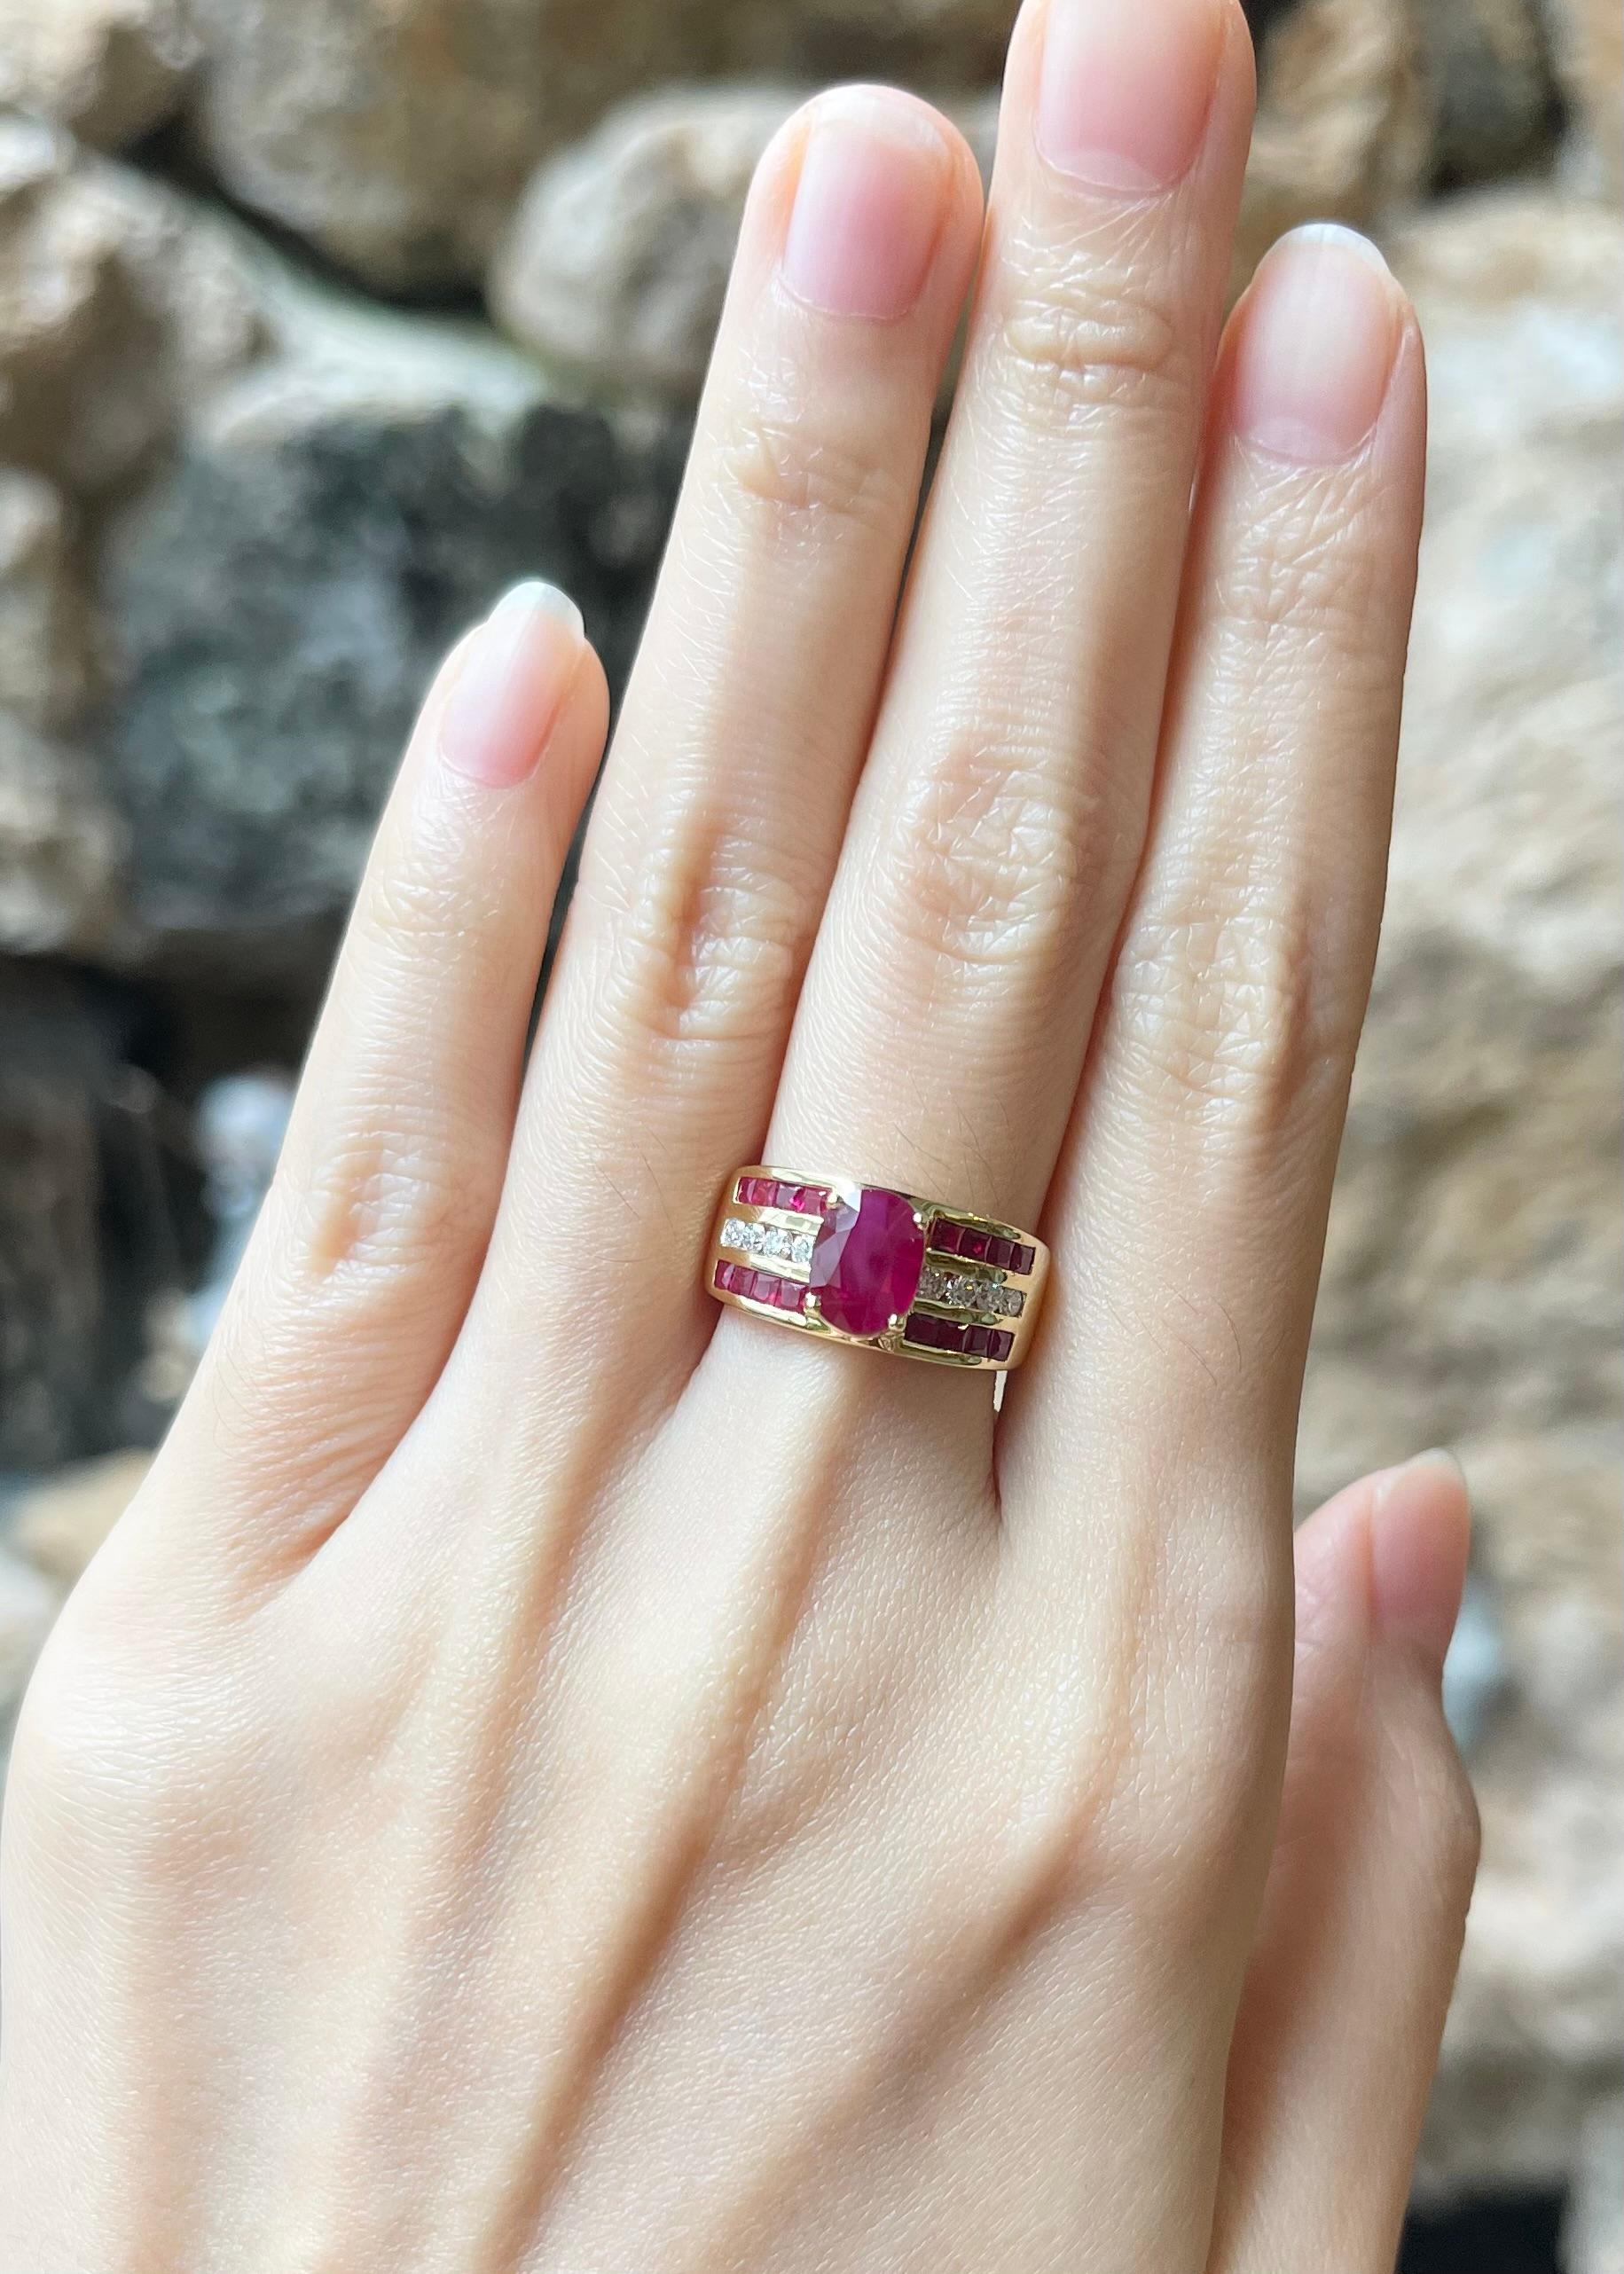 Ruby 1.71 carats, Ruby 0.76 carat and Diamond 0.24 carat Ring set in 18K Gold Settings

Width:  1.9 cm 
Length: 0.8 cm
Ring Size: 52
Total Weight: 7.22 grams

Ruby
Width:  0.6 cm 
Length: 0.8 cm

